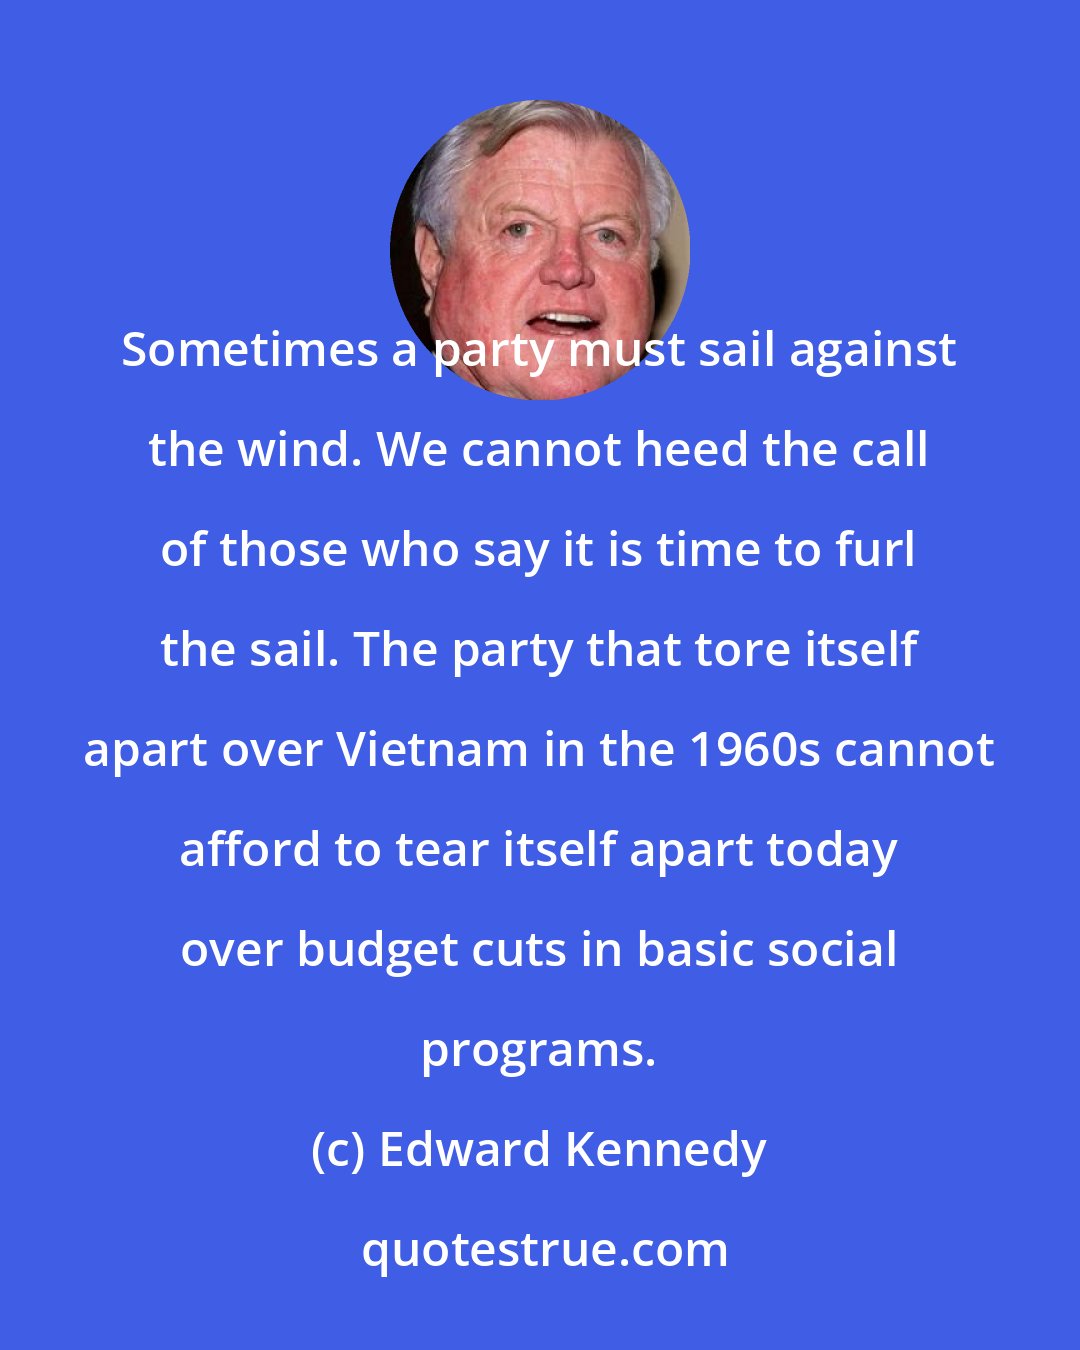 Edward Kennedy: Sometimes a party must sail against the wind. We cannot heed the call of those who say it is time to furl the sail. The party that tore itself apart over Vietnam in the 1960s cannot afford to tear itself apart today over budget cuts in basic social programs.